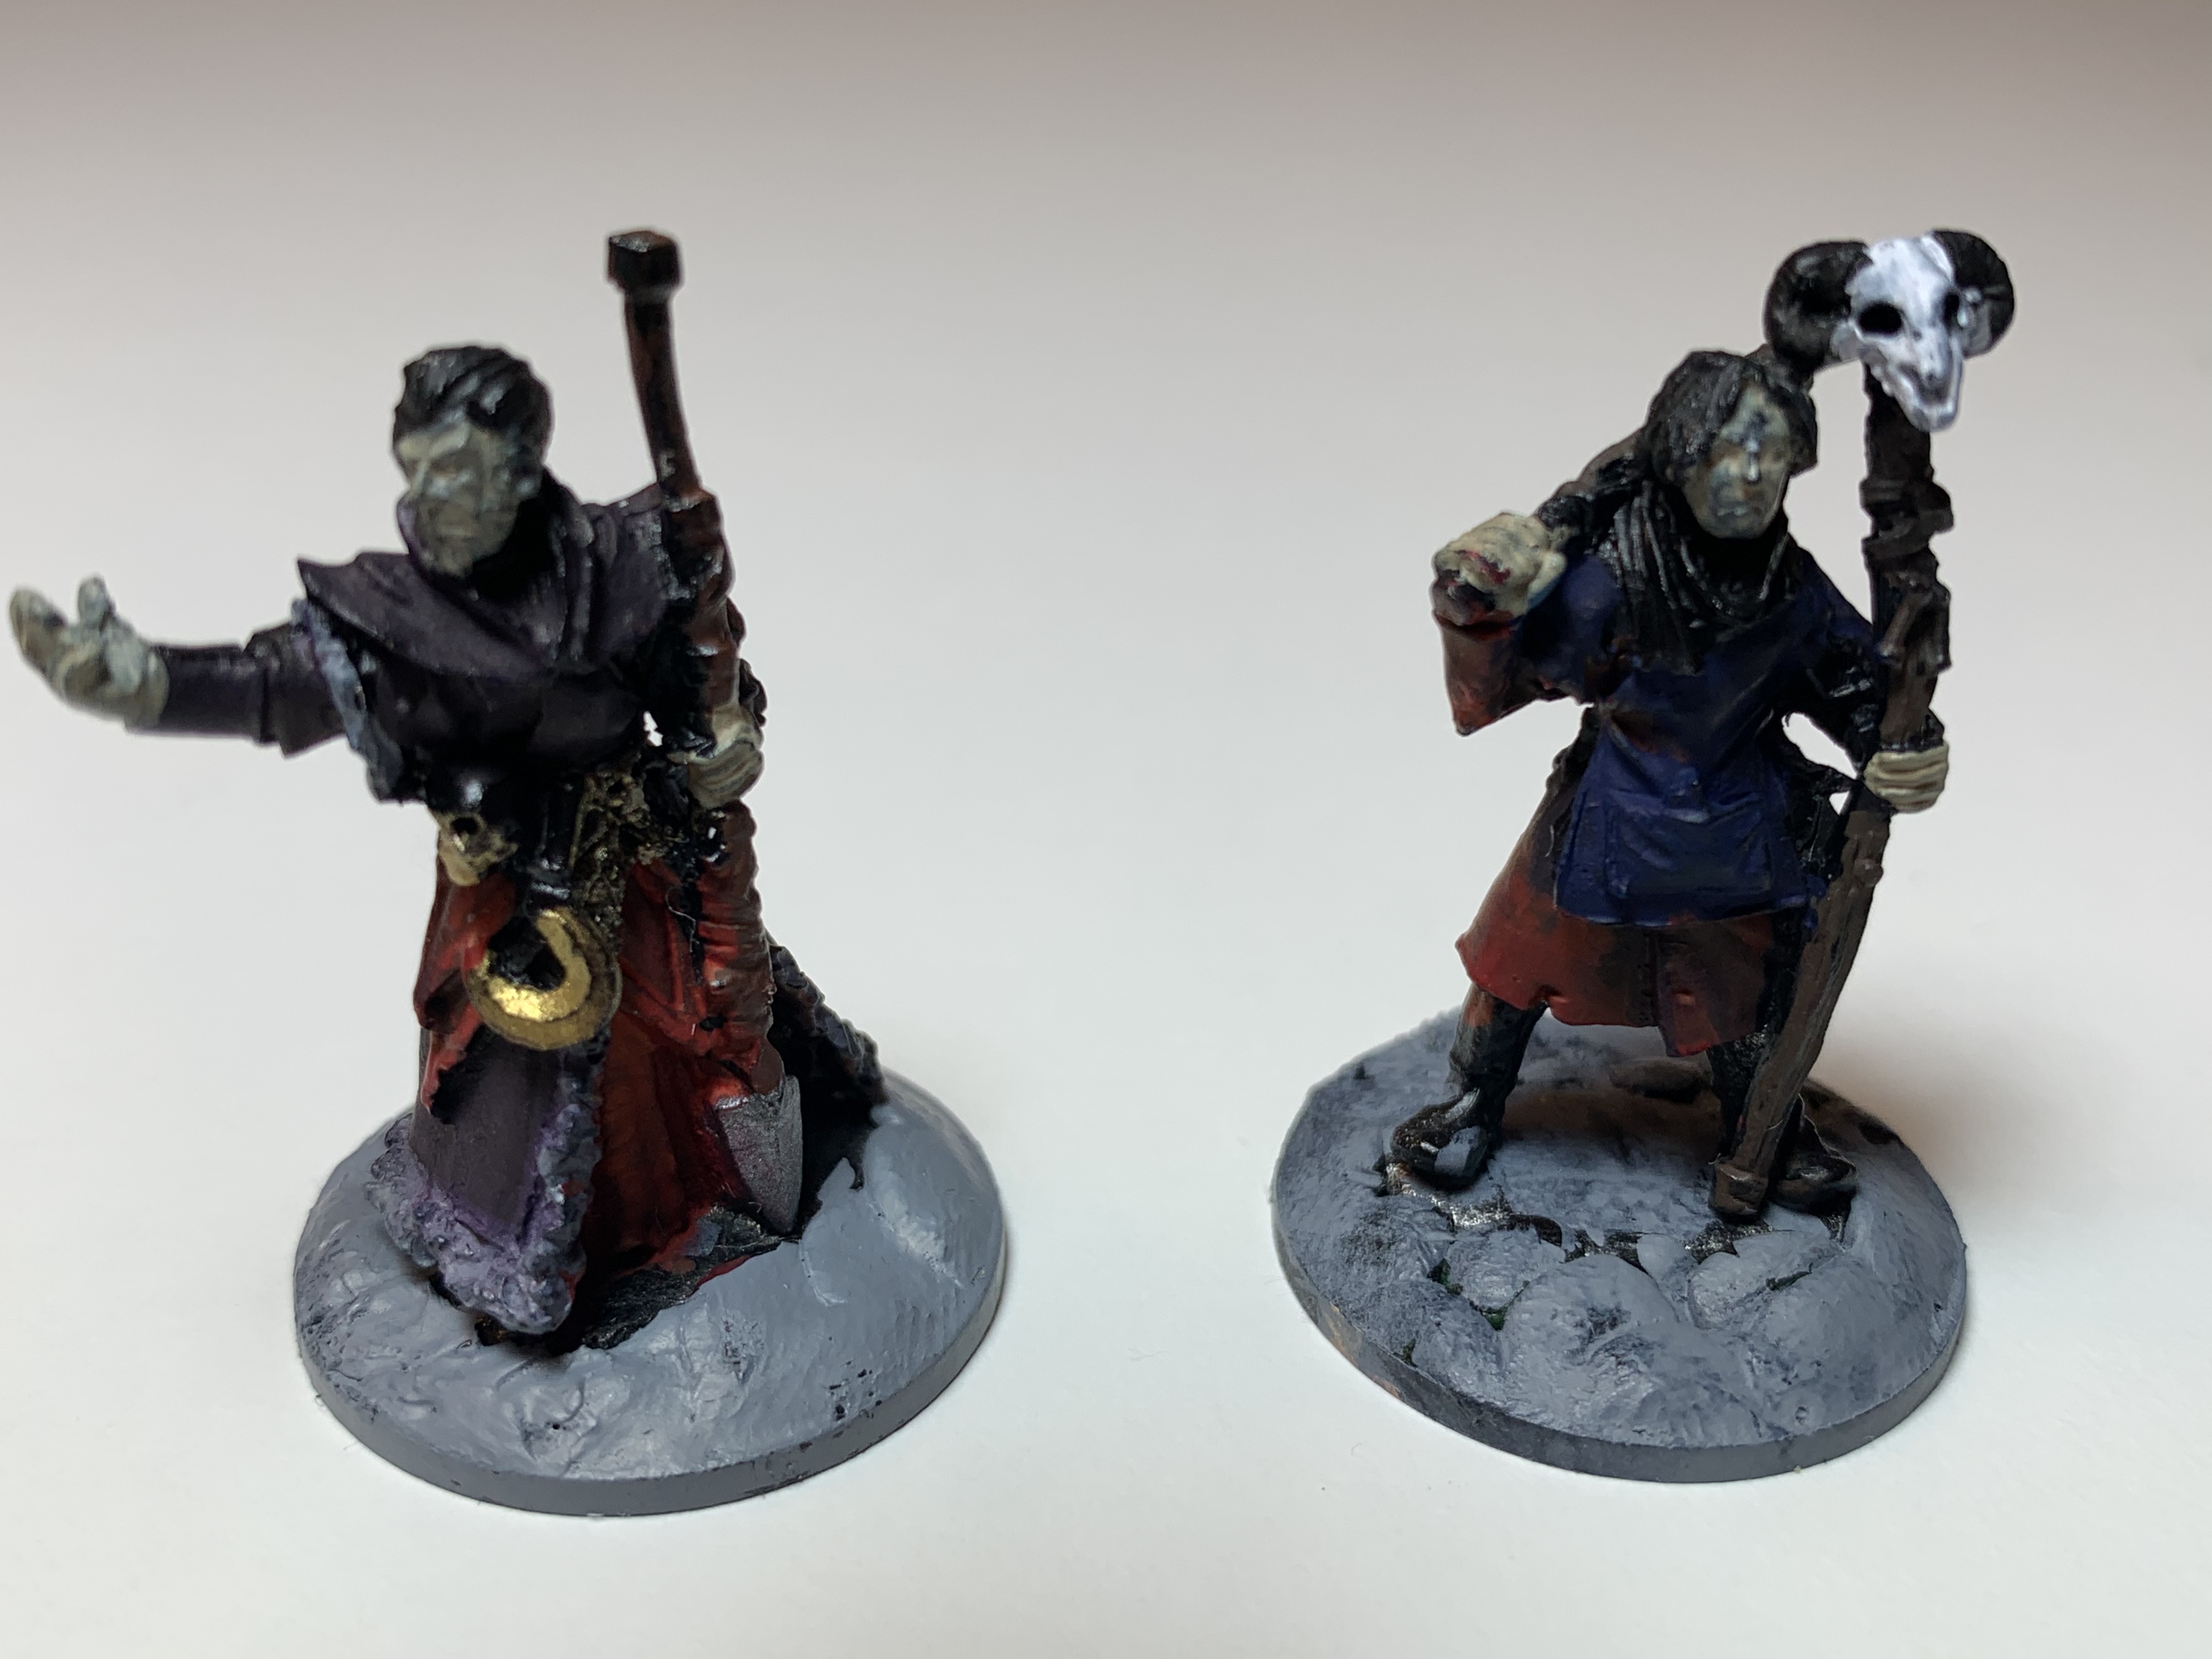 Frostgrave #2 by Cuirass